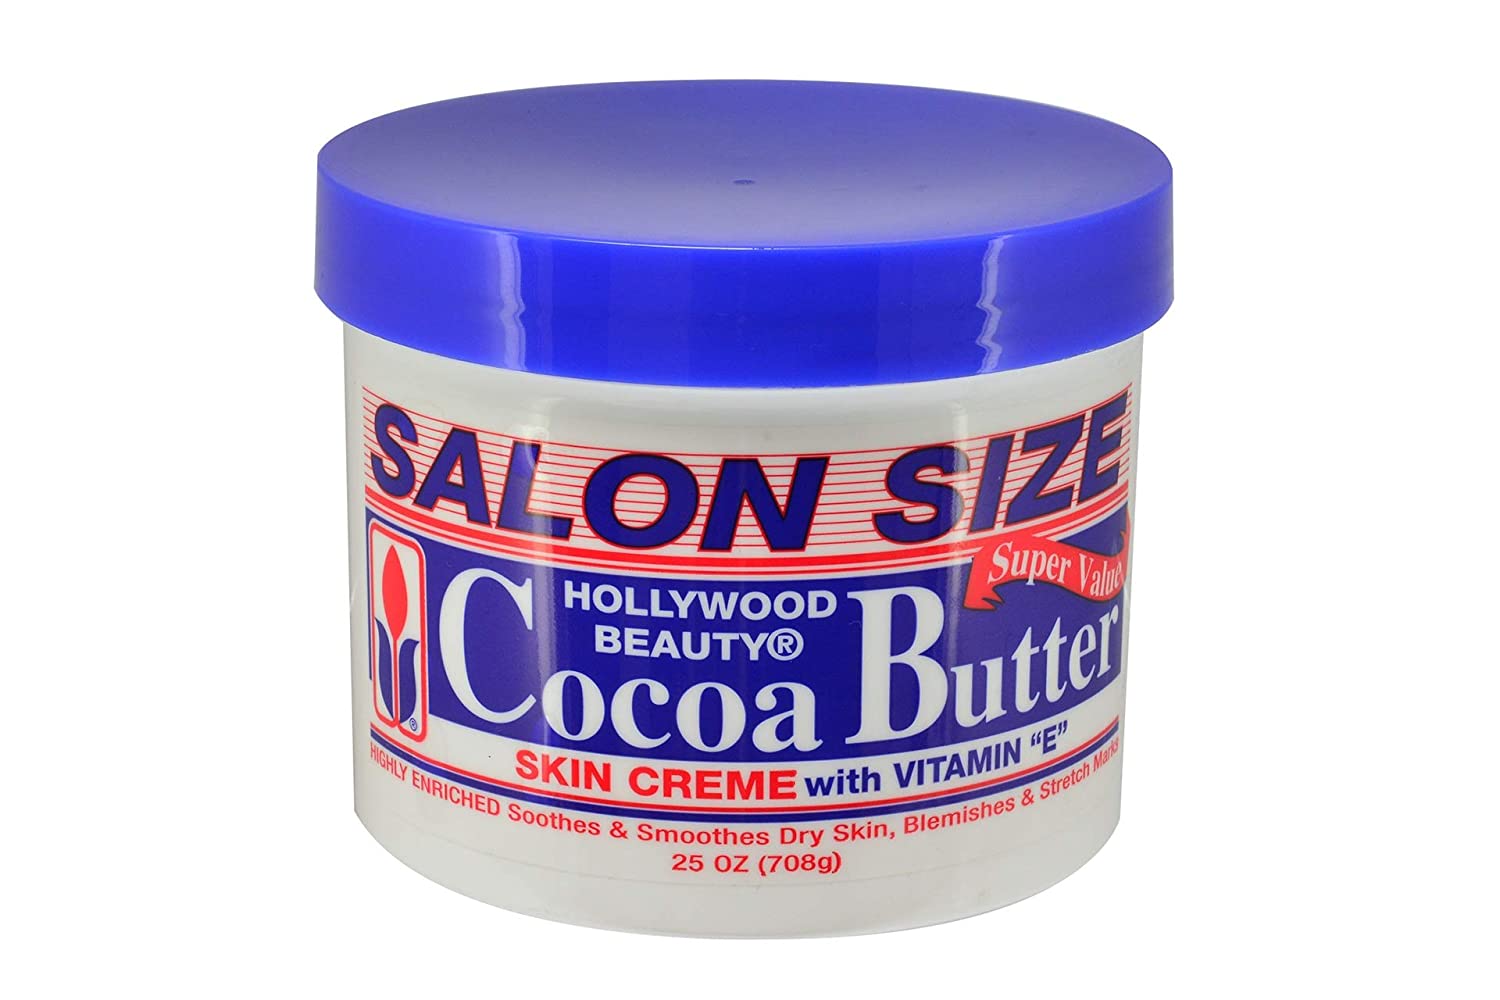 Hollywood Beauty Cocoa Butter Creme Super Size 24oz